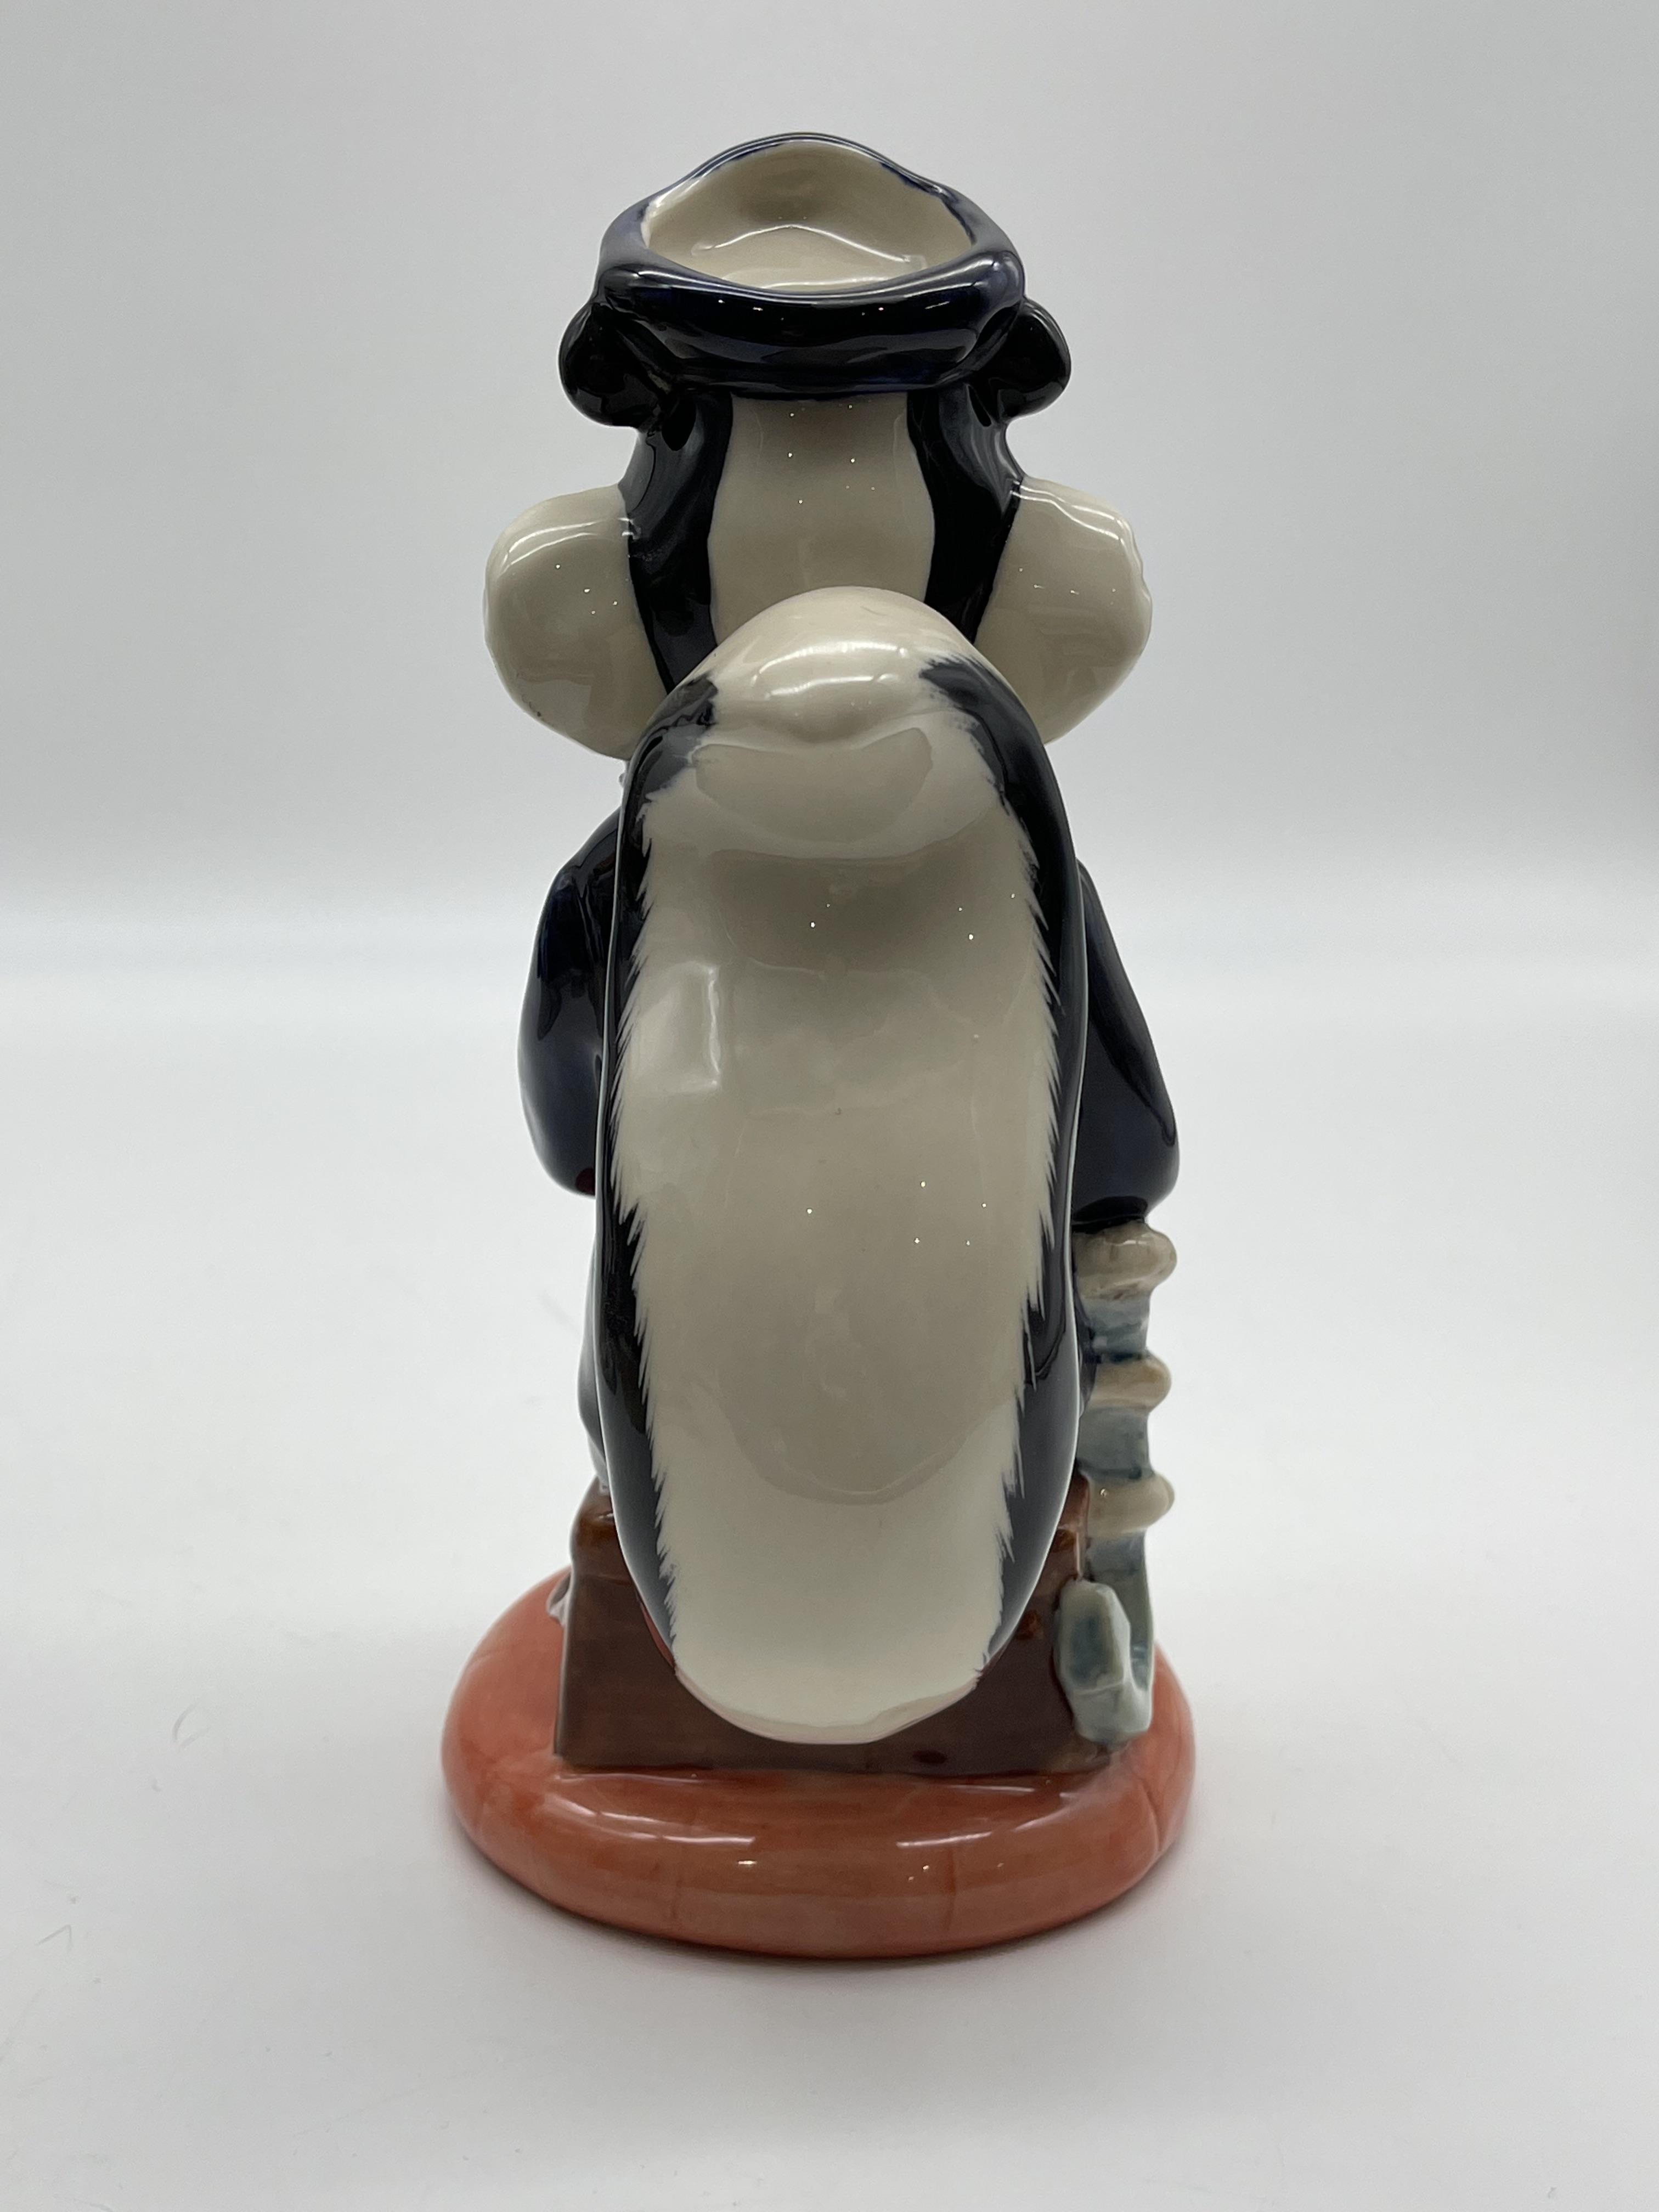 Five Limited Edition Kevin Francis Character Jugs - Image 28 of 32